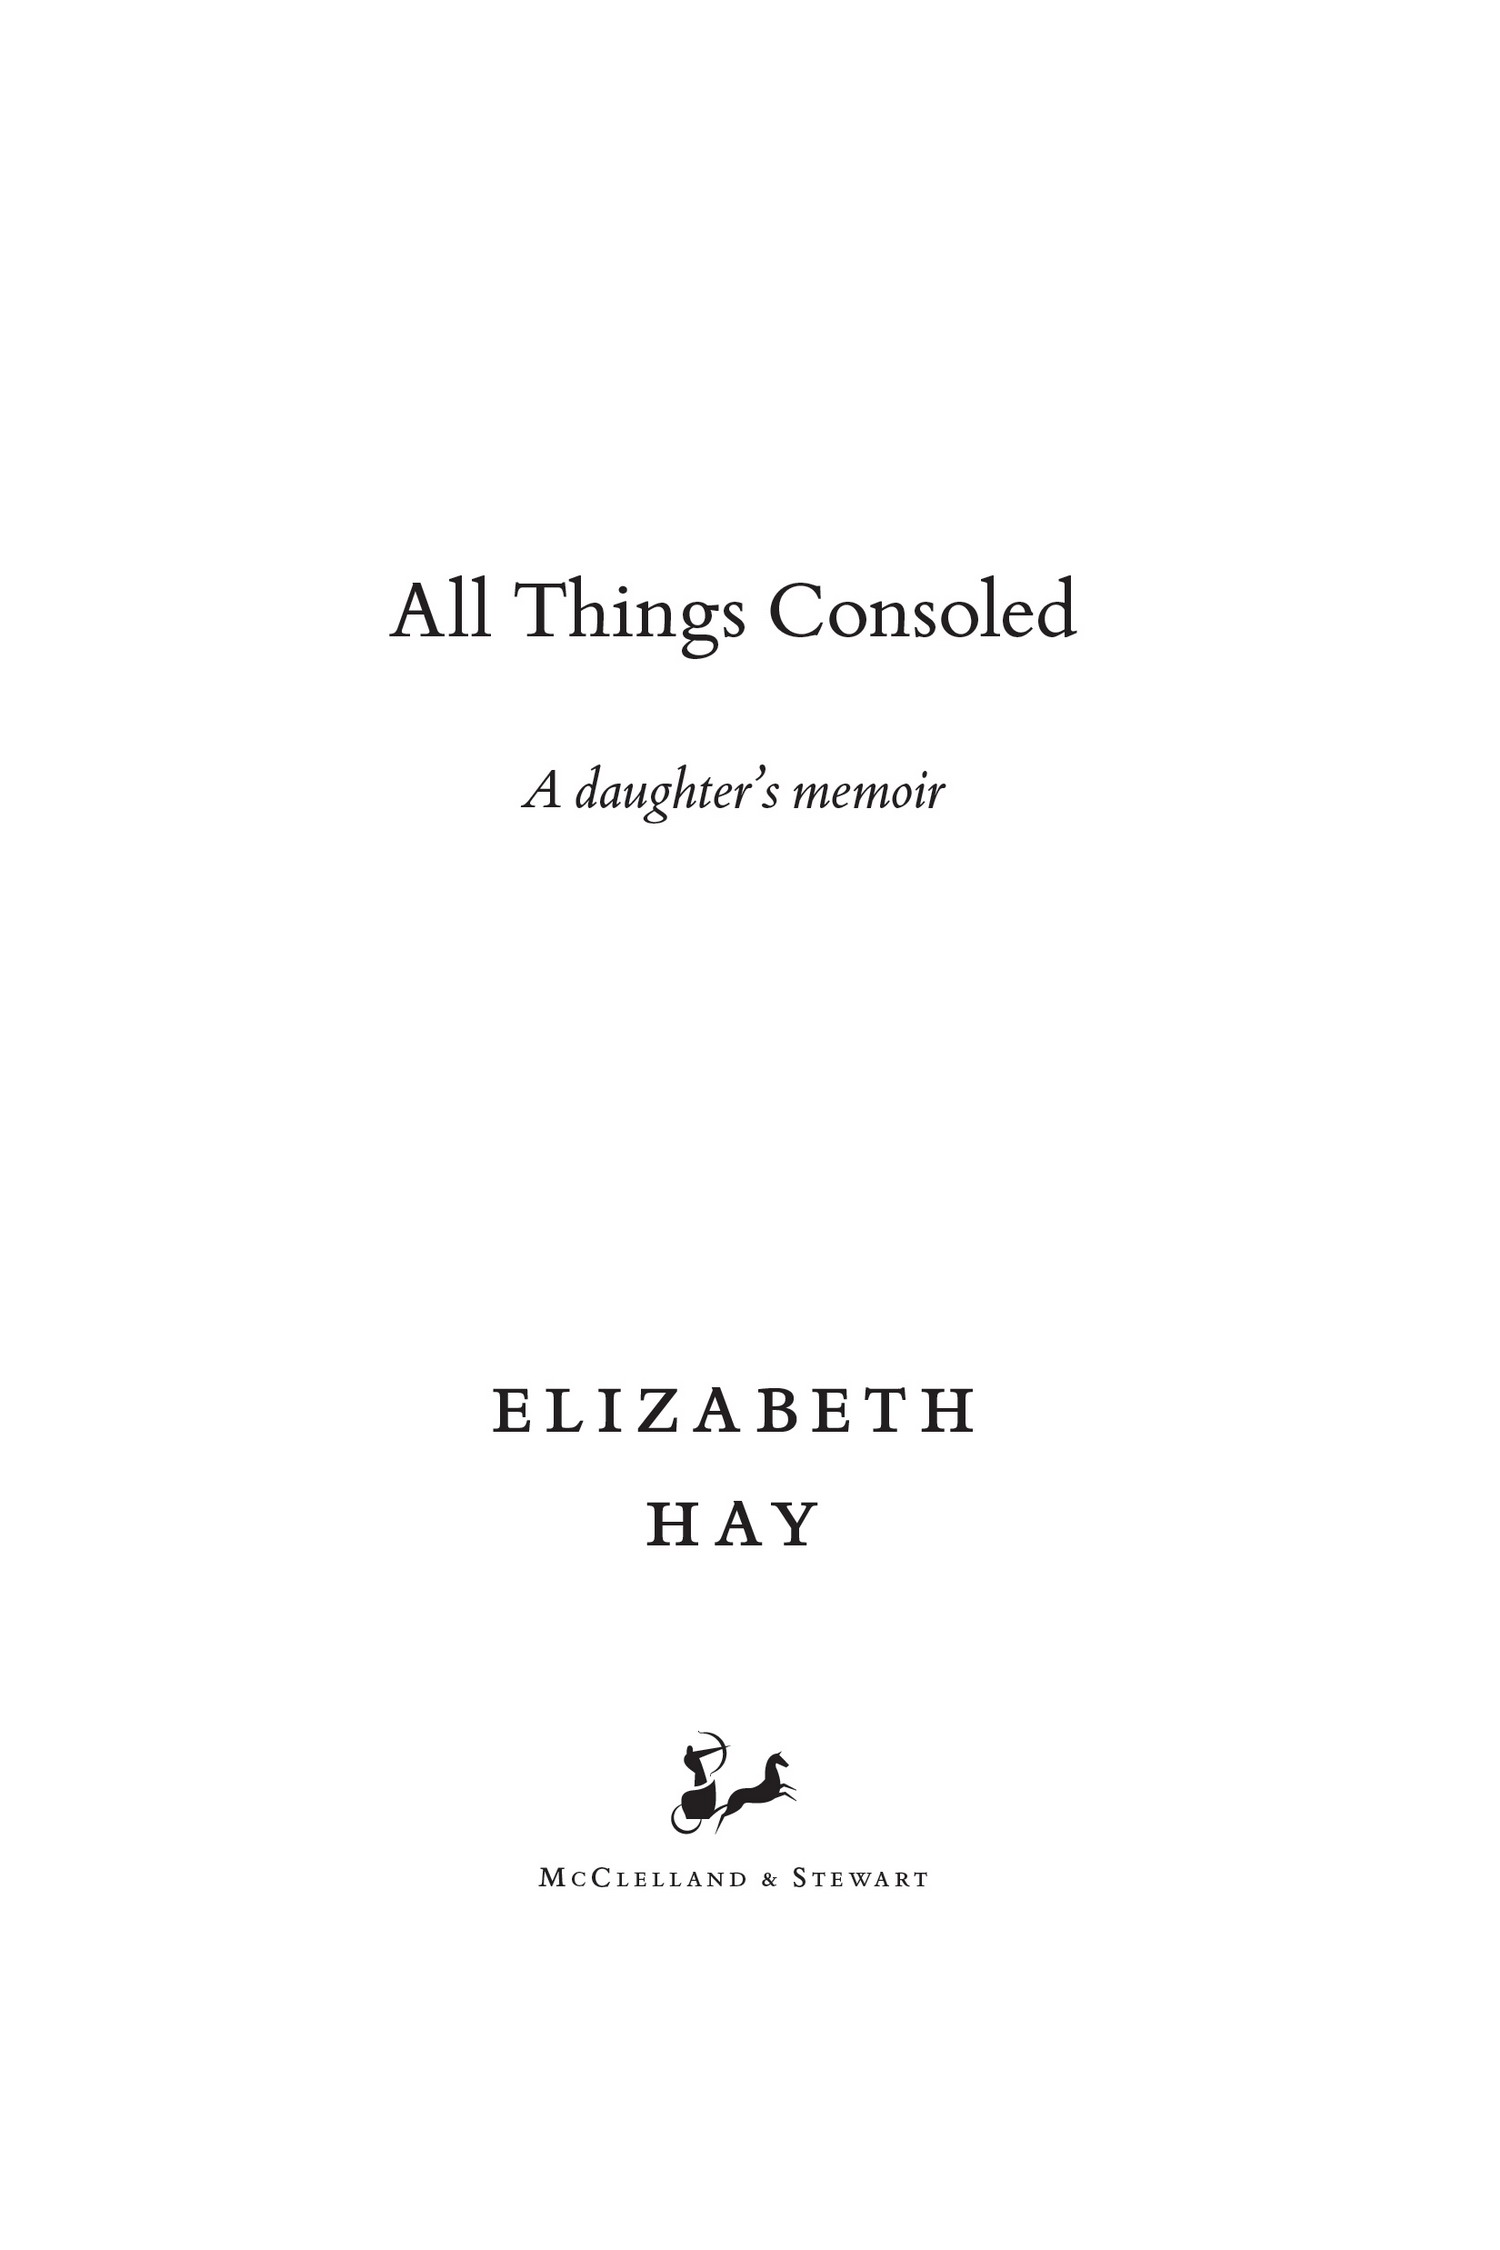 Copyright 2018 by Elizabeth Hay Hardcover edition published 2018 All rights - photo 3